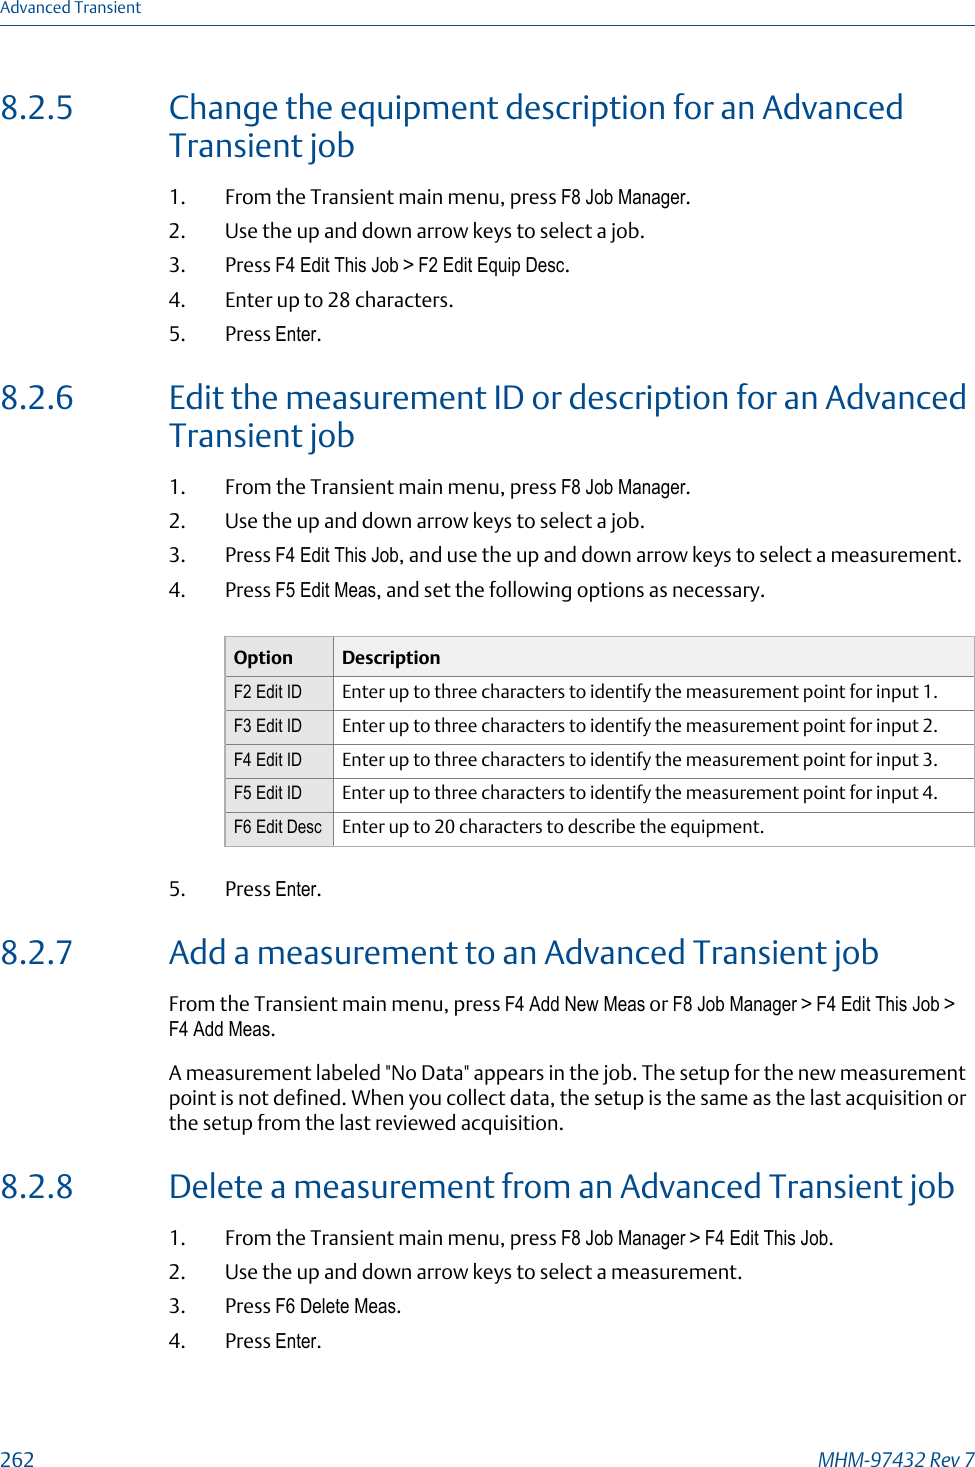 8.2.5 Change the equipment description for an AdvancedTransient job1. From the Transient main menu, press F8 Job Manager.2. Use the up and down arrow keys to select a job.3. Press F4 Edit This Job &gt; F2 Edit Equip Desc.4. Enter up to 28 characters.5. Press Enter.8.2.6 Edit the measurement ID or description for an AdvancedTransient job1. From the Transient main menu, press F8 Job Manager.2. Use the up and down arrow keys to select a job.3. Press F4 Edit This Job, and use the up and down arrow keys to select a measurement.4. Press F5 Edit Meas, and set the following options as necessary.Option DescriptionF2 Edit ID Enter up to three characters to identify the measurement point for input 1.F3 Edit ID Enter up to three characters to identify the measurement point for input 2.F4 Edit ID Enter up to three characters to identify the measurement point for input 3.F5 Edit ID Enter up to three characters to identify the measurement point for input 4.F6 Edit Desc Enter up to 20 characters to describe the equipment.5. Press Enter.8.2.7 Add a measurement to an Advanced Transient jobFrom the Transient main menu, press F4 Add New Meas or F8 Job Manager &gt; F4 Edit This Job &gt;F4 Add Meas.A measurement labeled &quot;No Data&quot; appears in the job. The setup for the new measurementpoint is not defined. When you collect data, the setup is the same as the last acquisition orthe setup from the last reviewed acquisition.8.2.8 Delete a measurement from an Advanced Transient job1. From the Transient main menu, press F8 Job Manager &gt; F4 Edit This Job.2. Use the up and down arrow keys to select a measurement.3. Press F6 Delete Meas.4. Press Enter.Advanced Transient262 MHM-97432 Rev 7